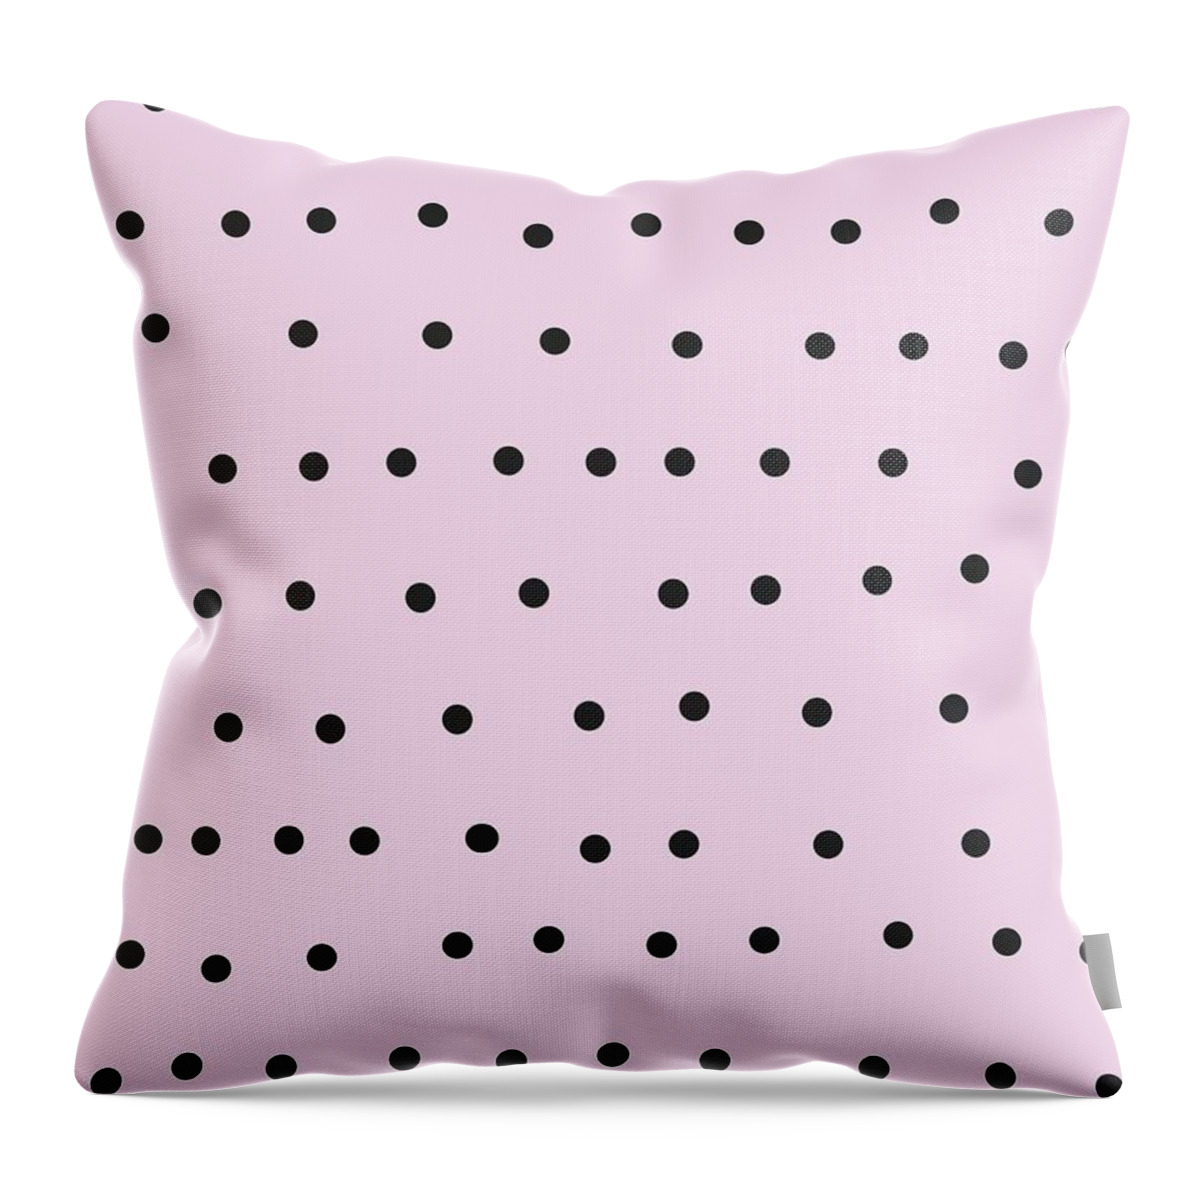 Pattern Throw Pillow featuring the digital art Whimsical Black Polka Dots On Pink by Ashley Rice